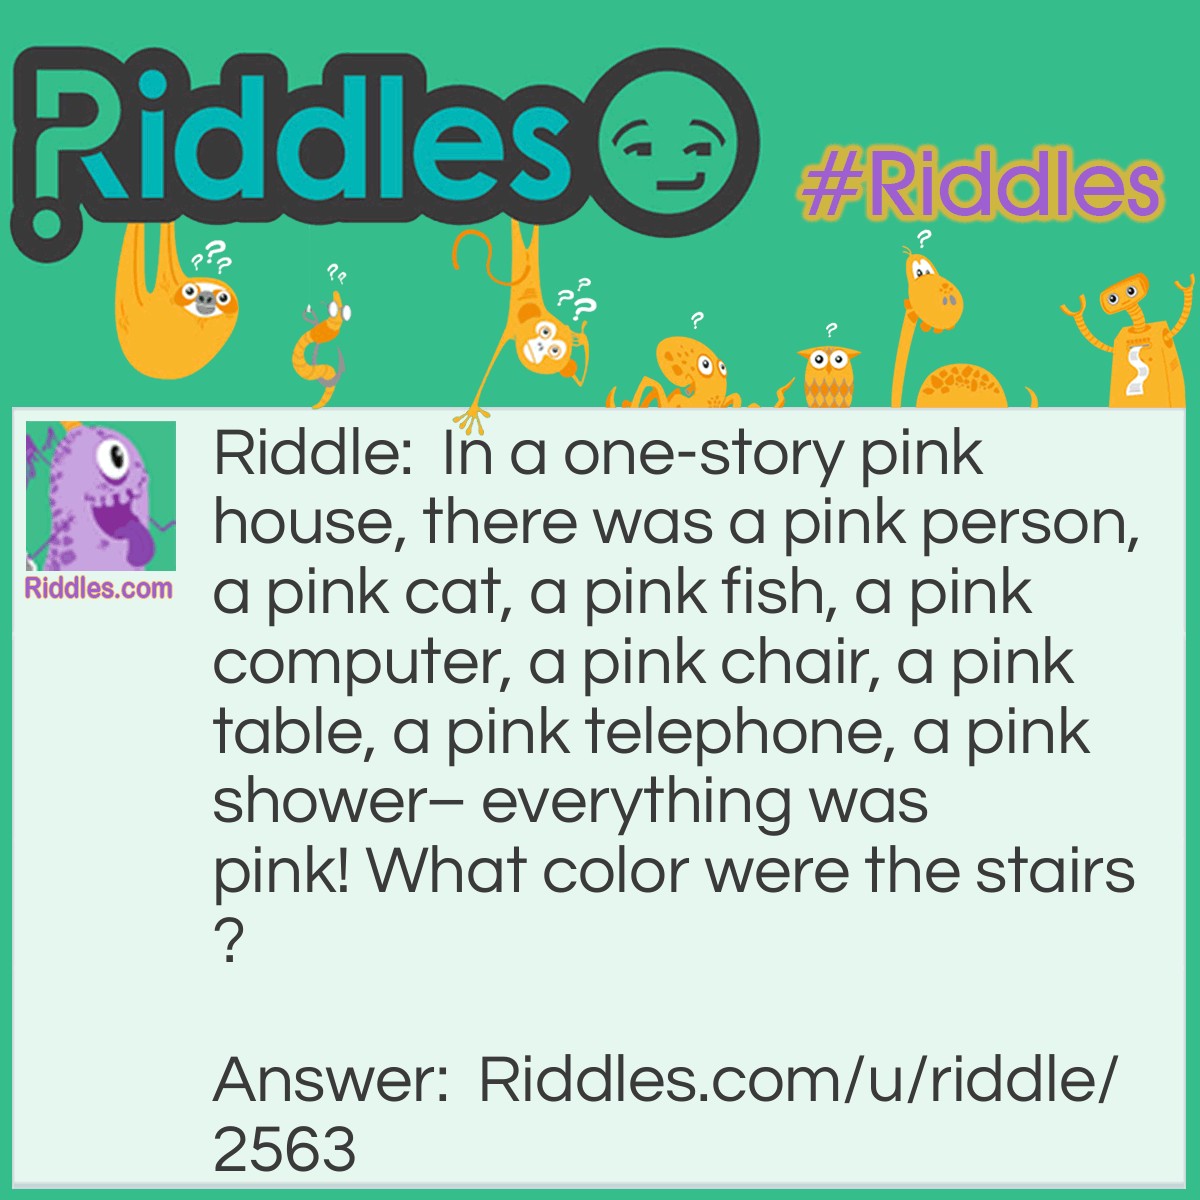 Riddle: In a one-story pink house, there was a pink person, a pink cat, a pink fish, a pink computer, a pink chair, a pink table, a pink telephone, a pink shower- everything was pink! What color were the stairs? Answer: There weren’t any stairs, it was a one story house!